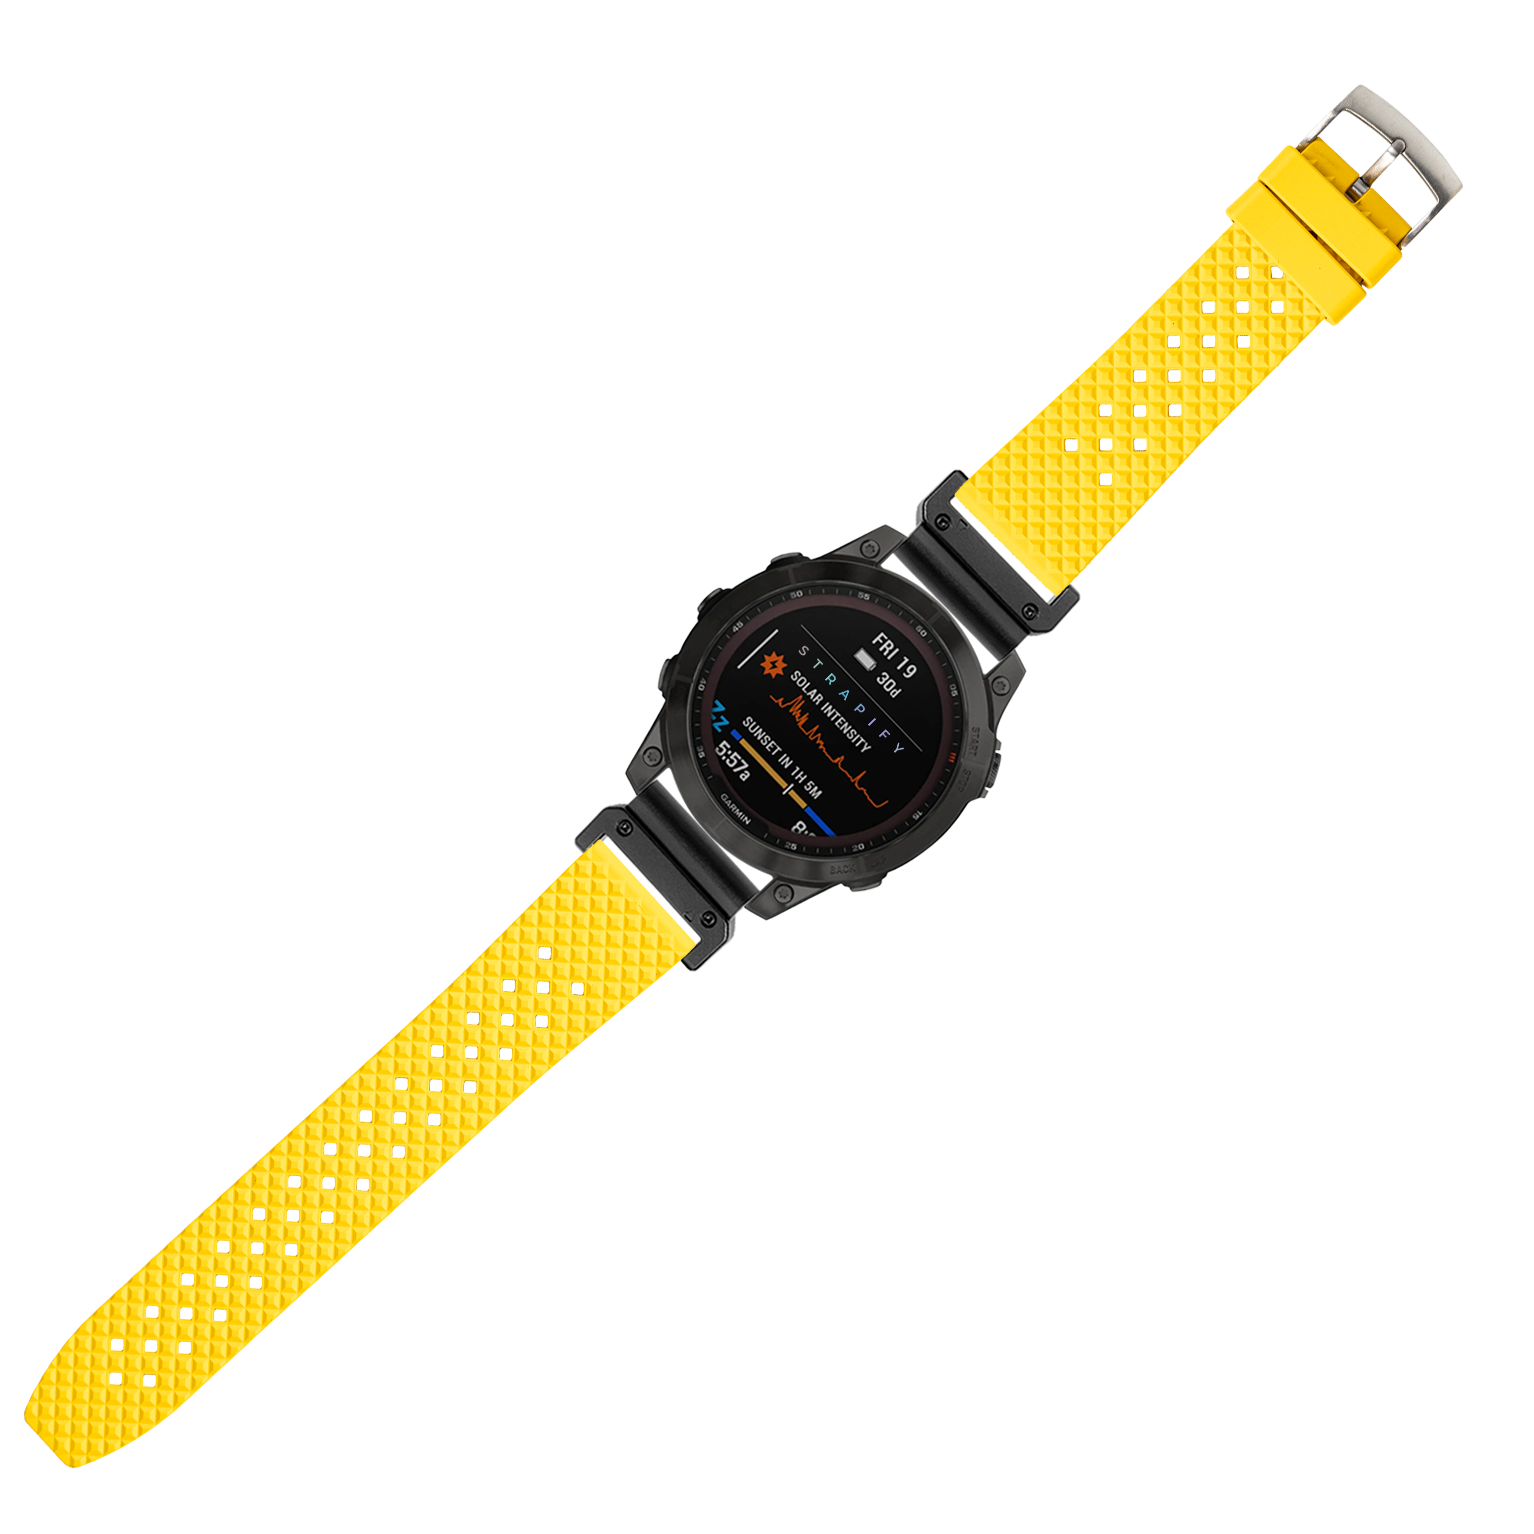 [QuickFit] King Honeycomb FKM Rubber - Yellow 26mm